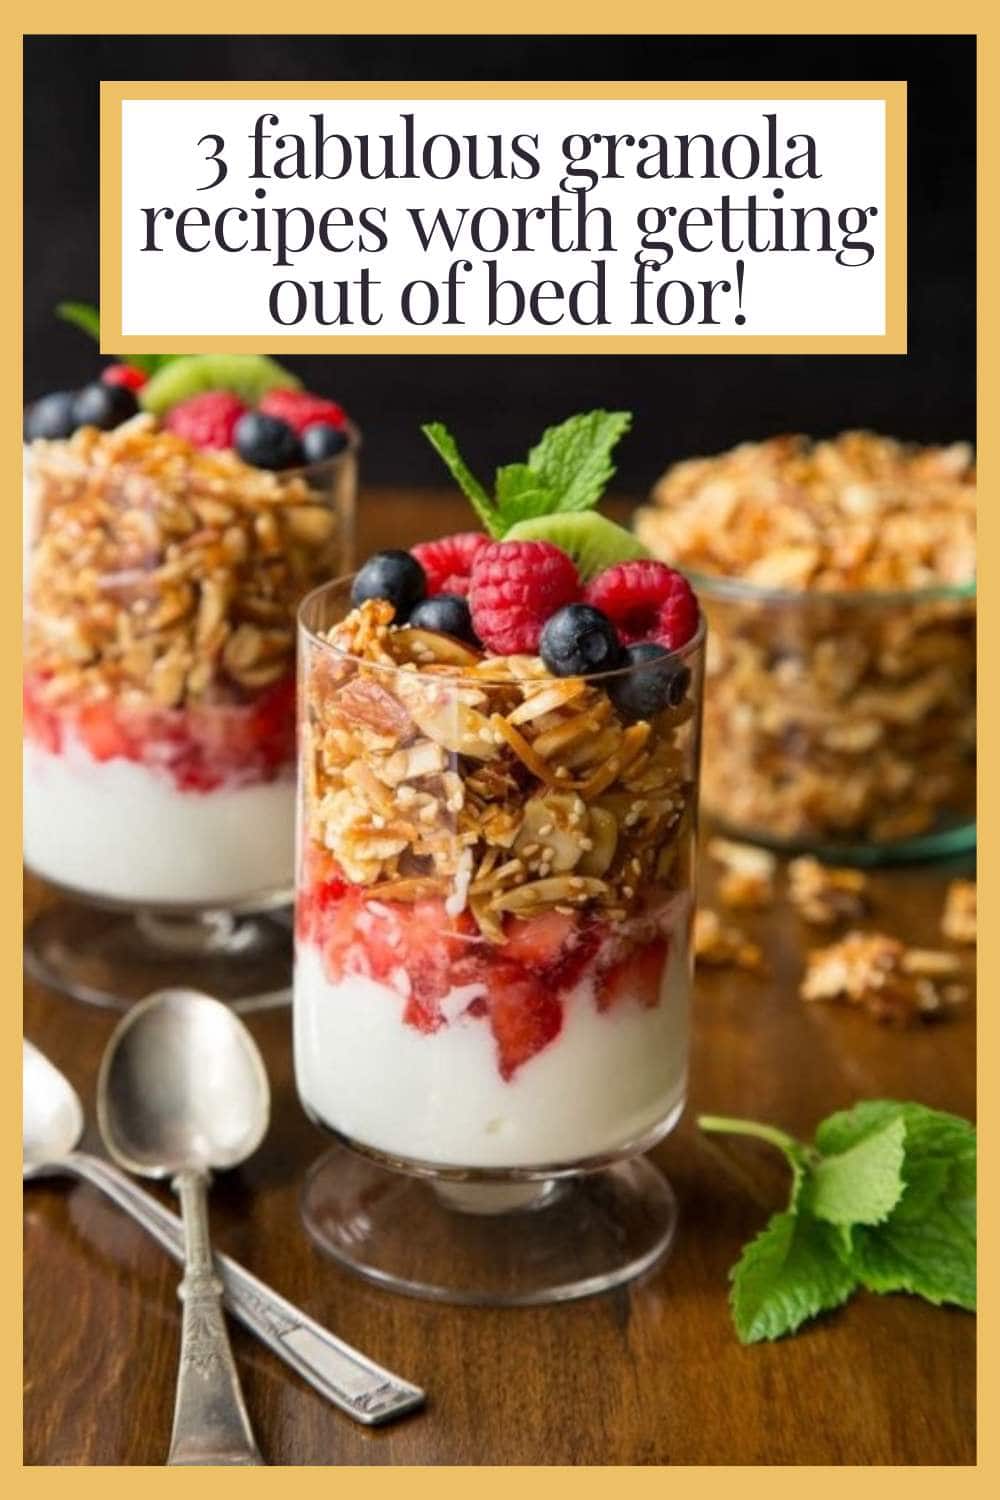 Three Fabulous Granola Recipes Worth Getting Out of Bed For!